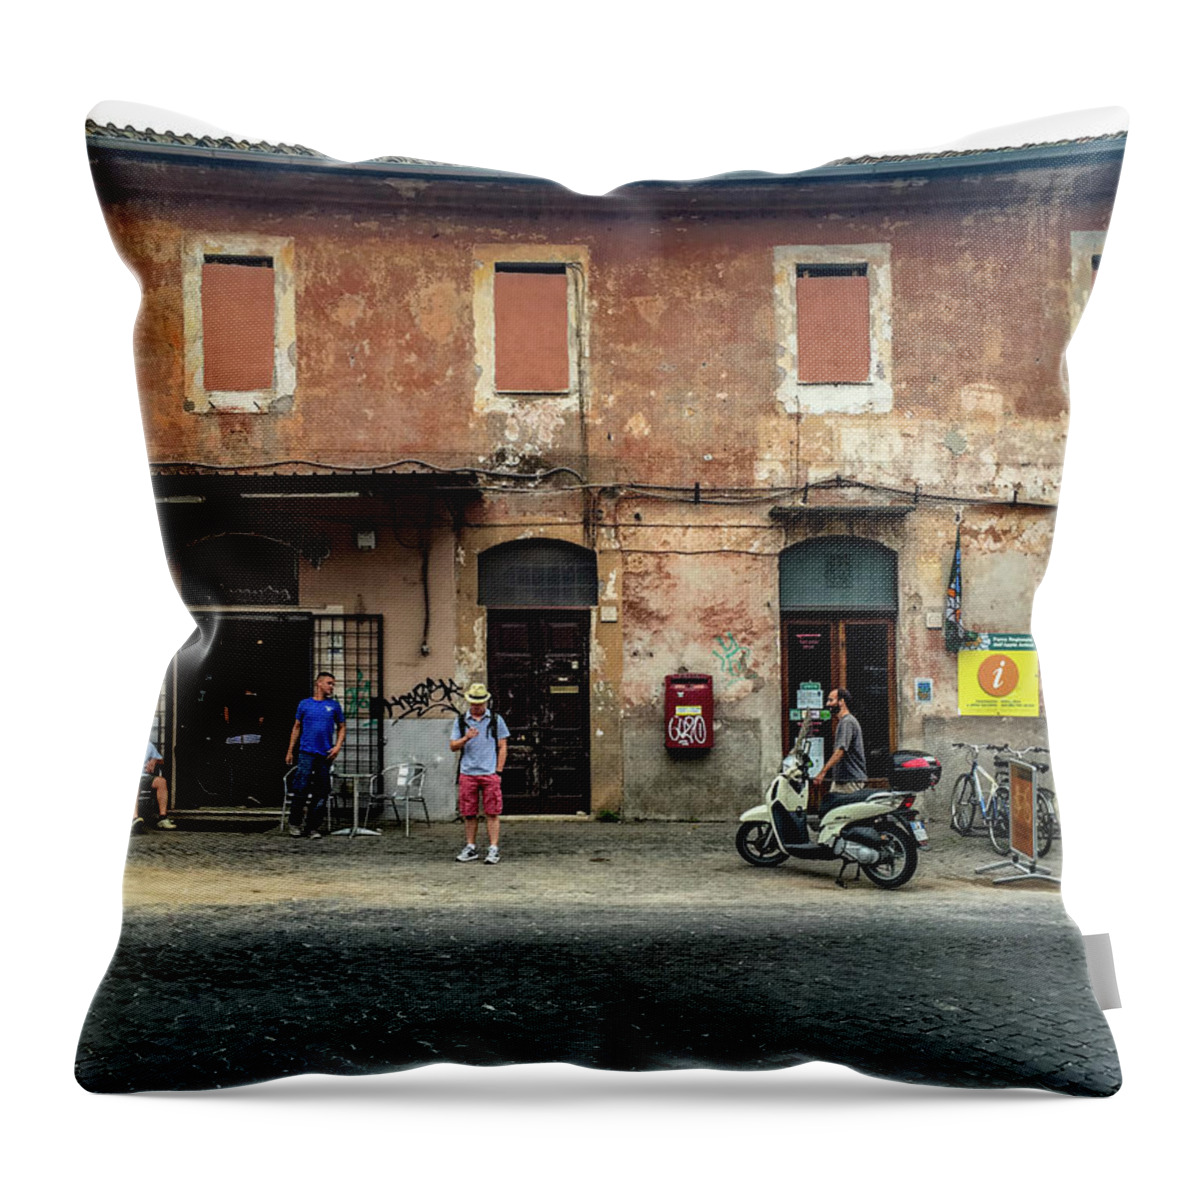 Appian Way Throw Pillow featuring the photograph Appia Antica Break by Joseph Yarbrough